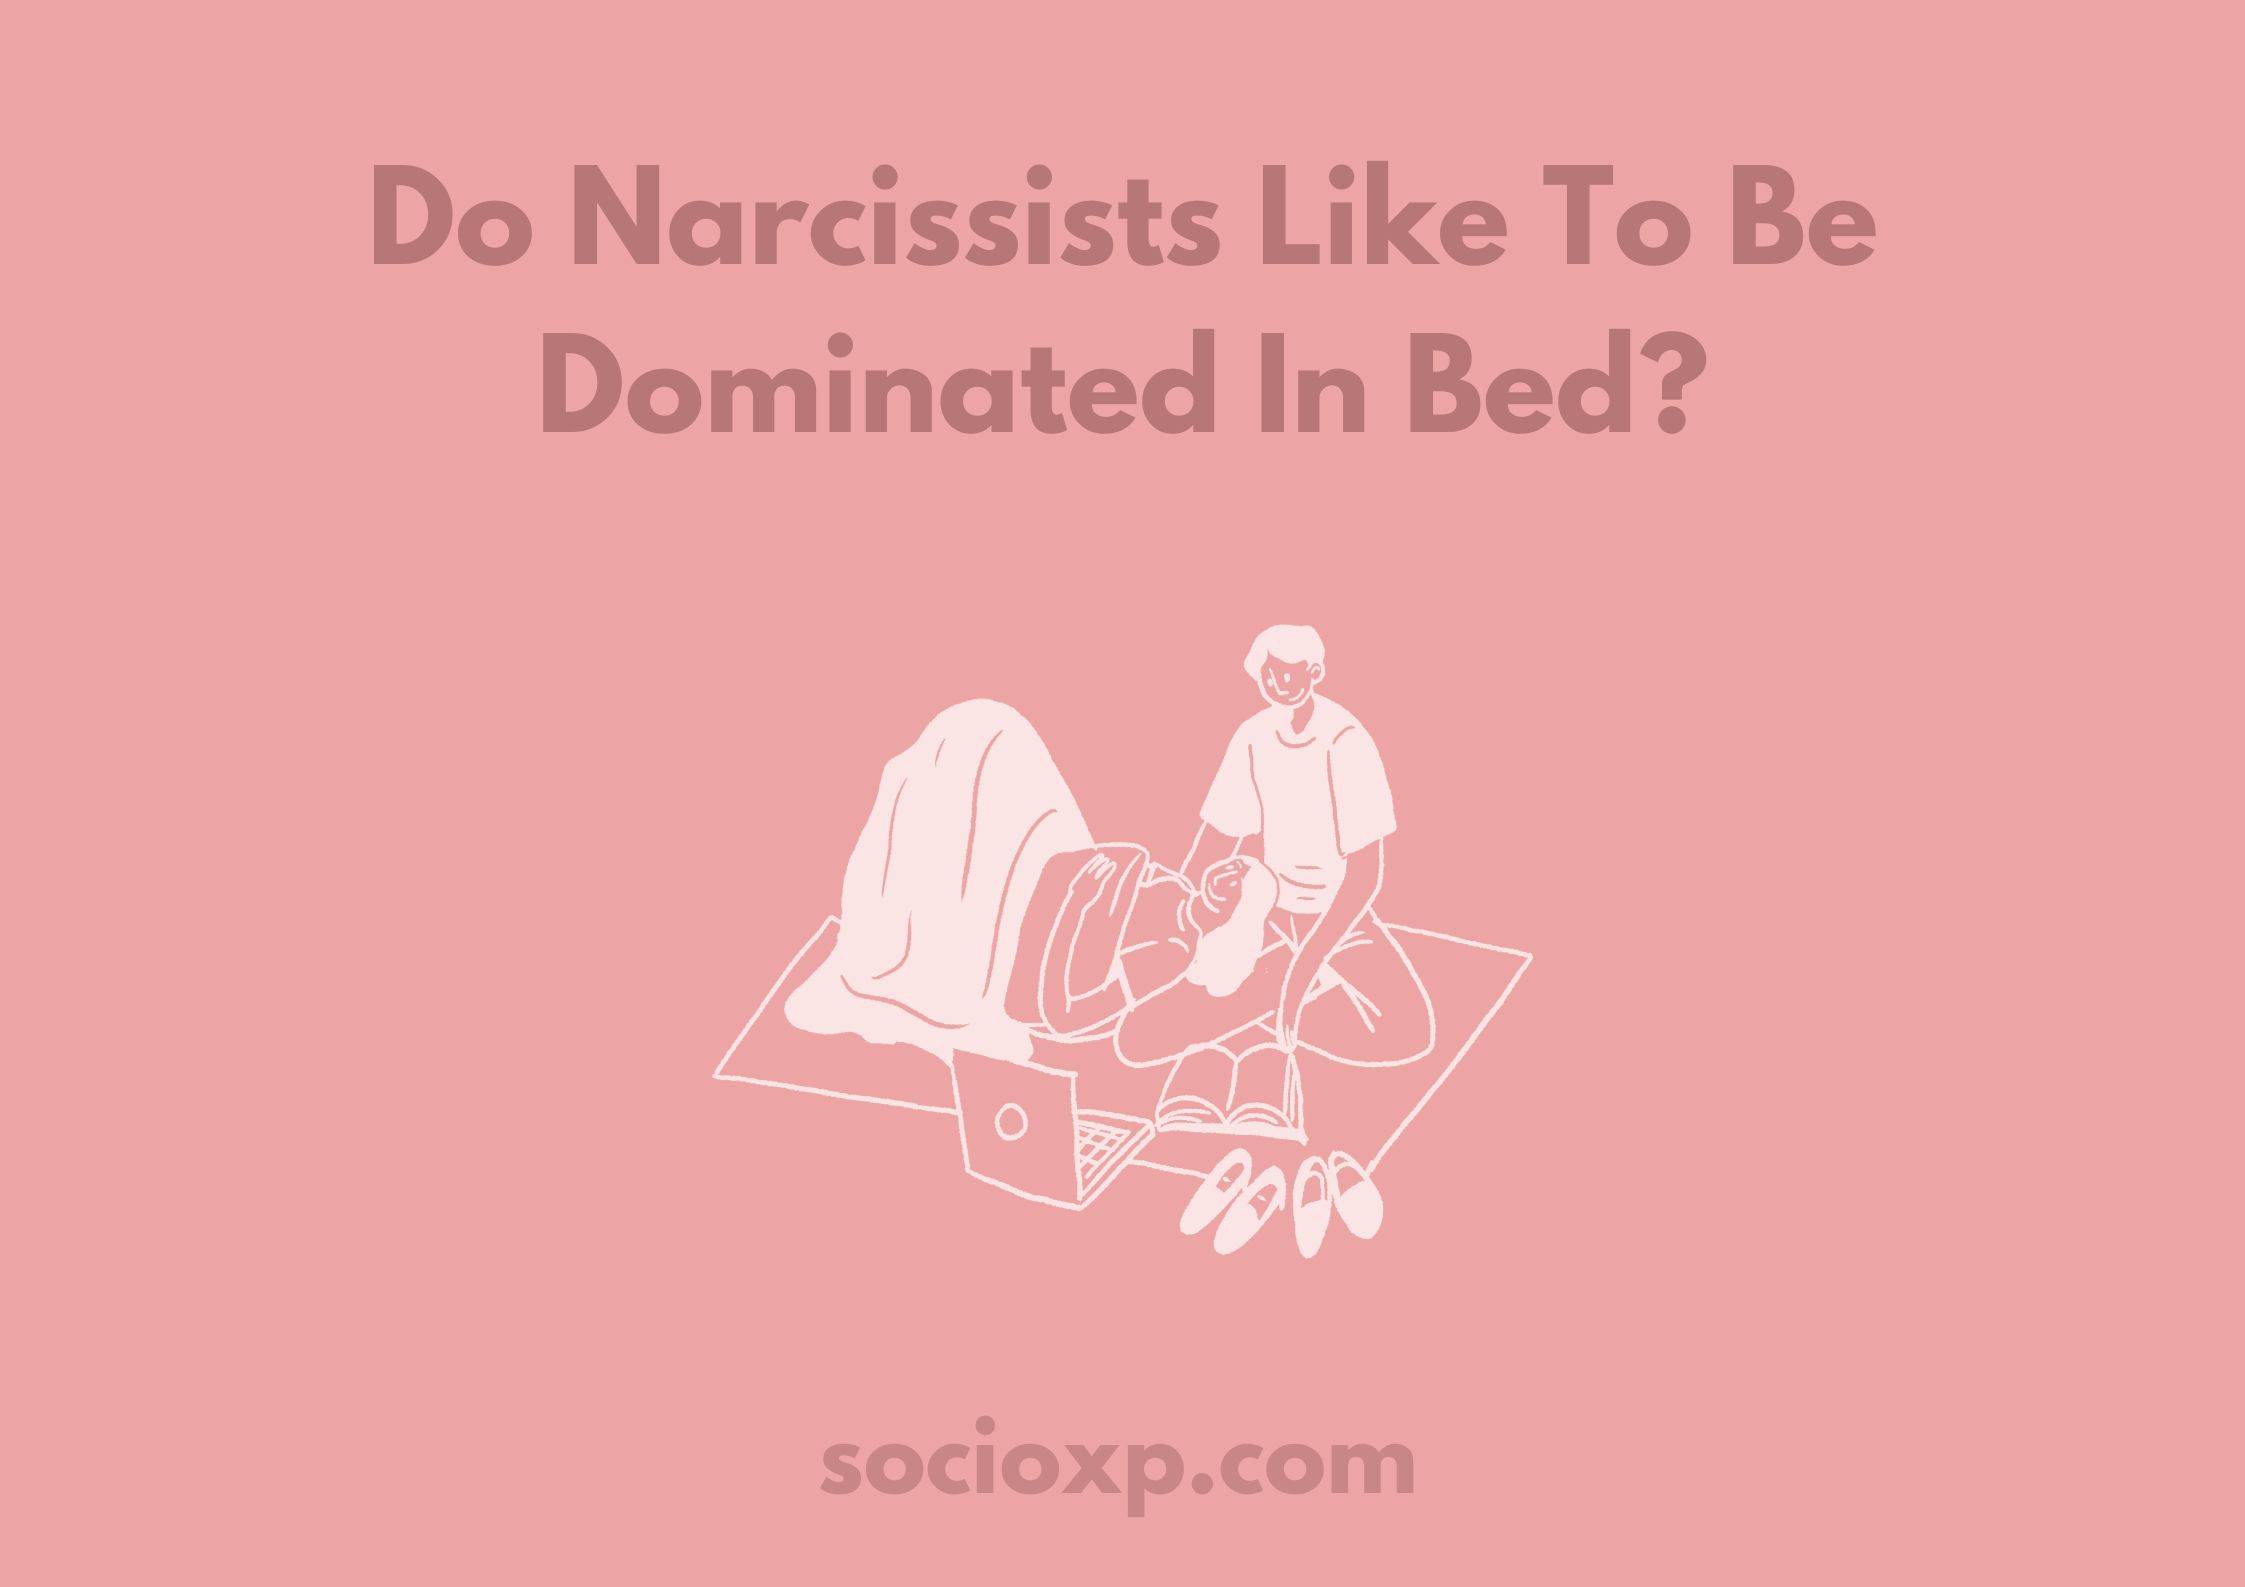 Do Narcissists Like To Be Dominated In Bed?